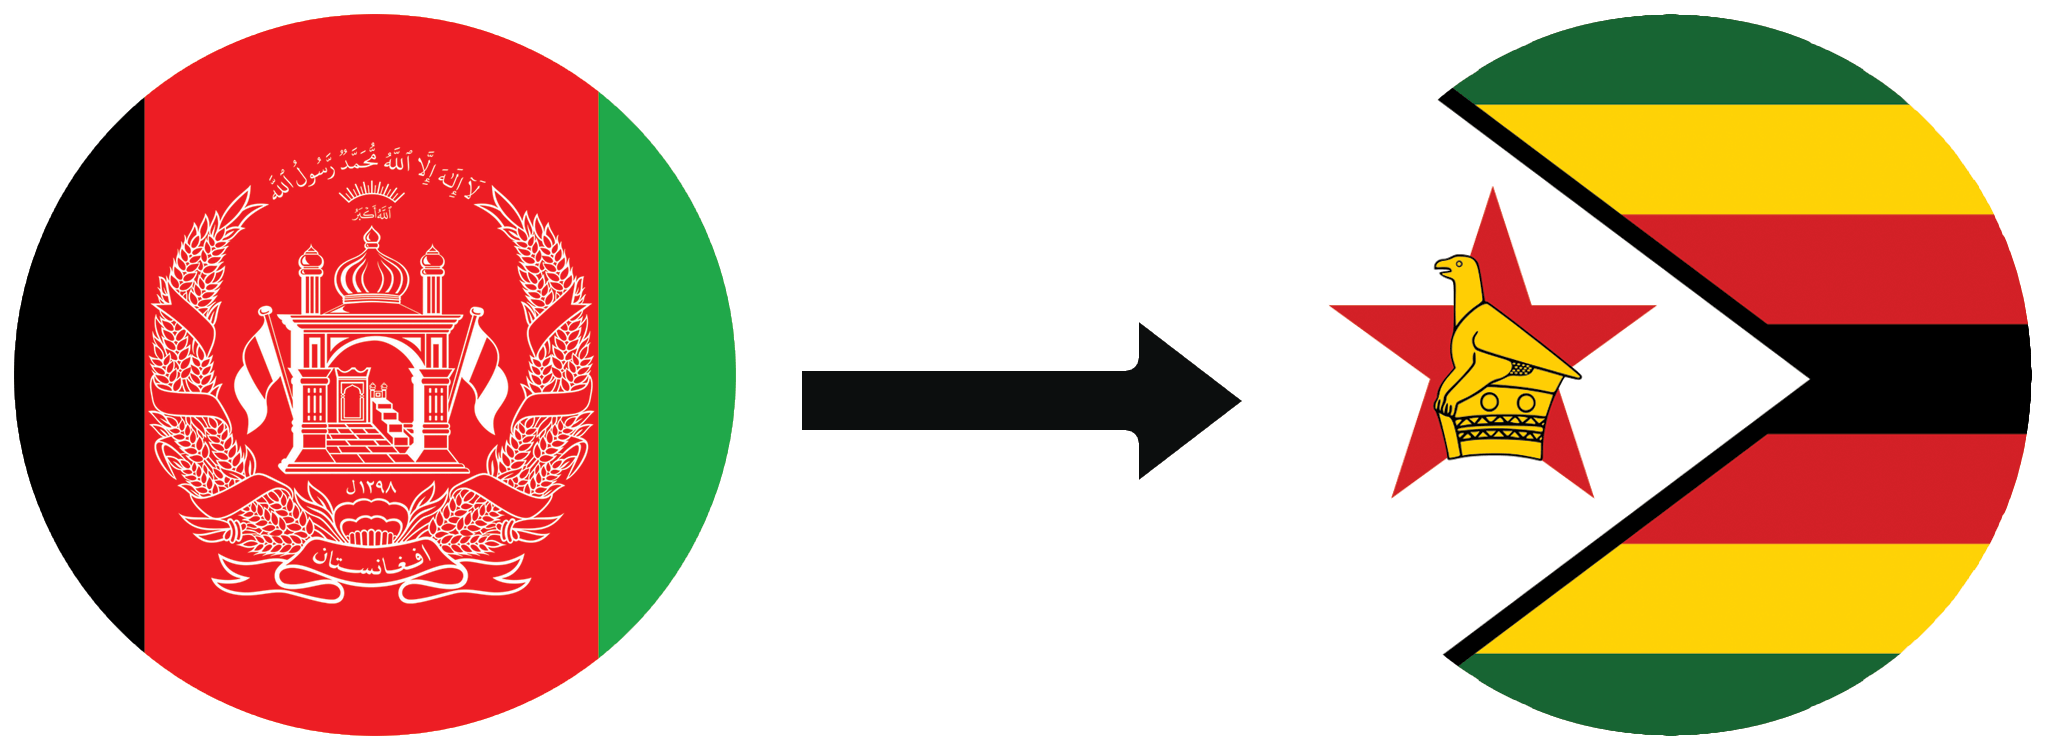 A Green Circle With Red Star And Arrow Pointing To A Black Arrow